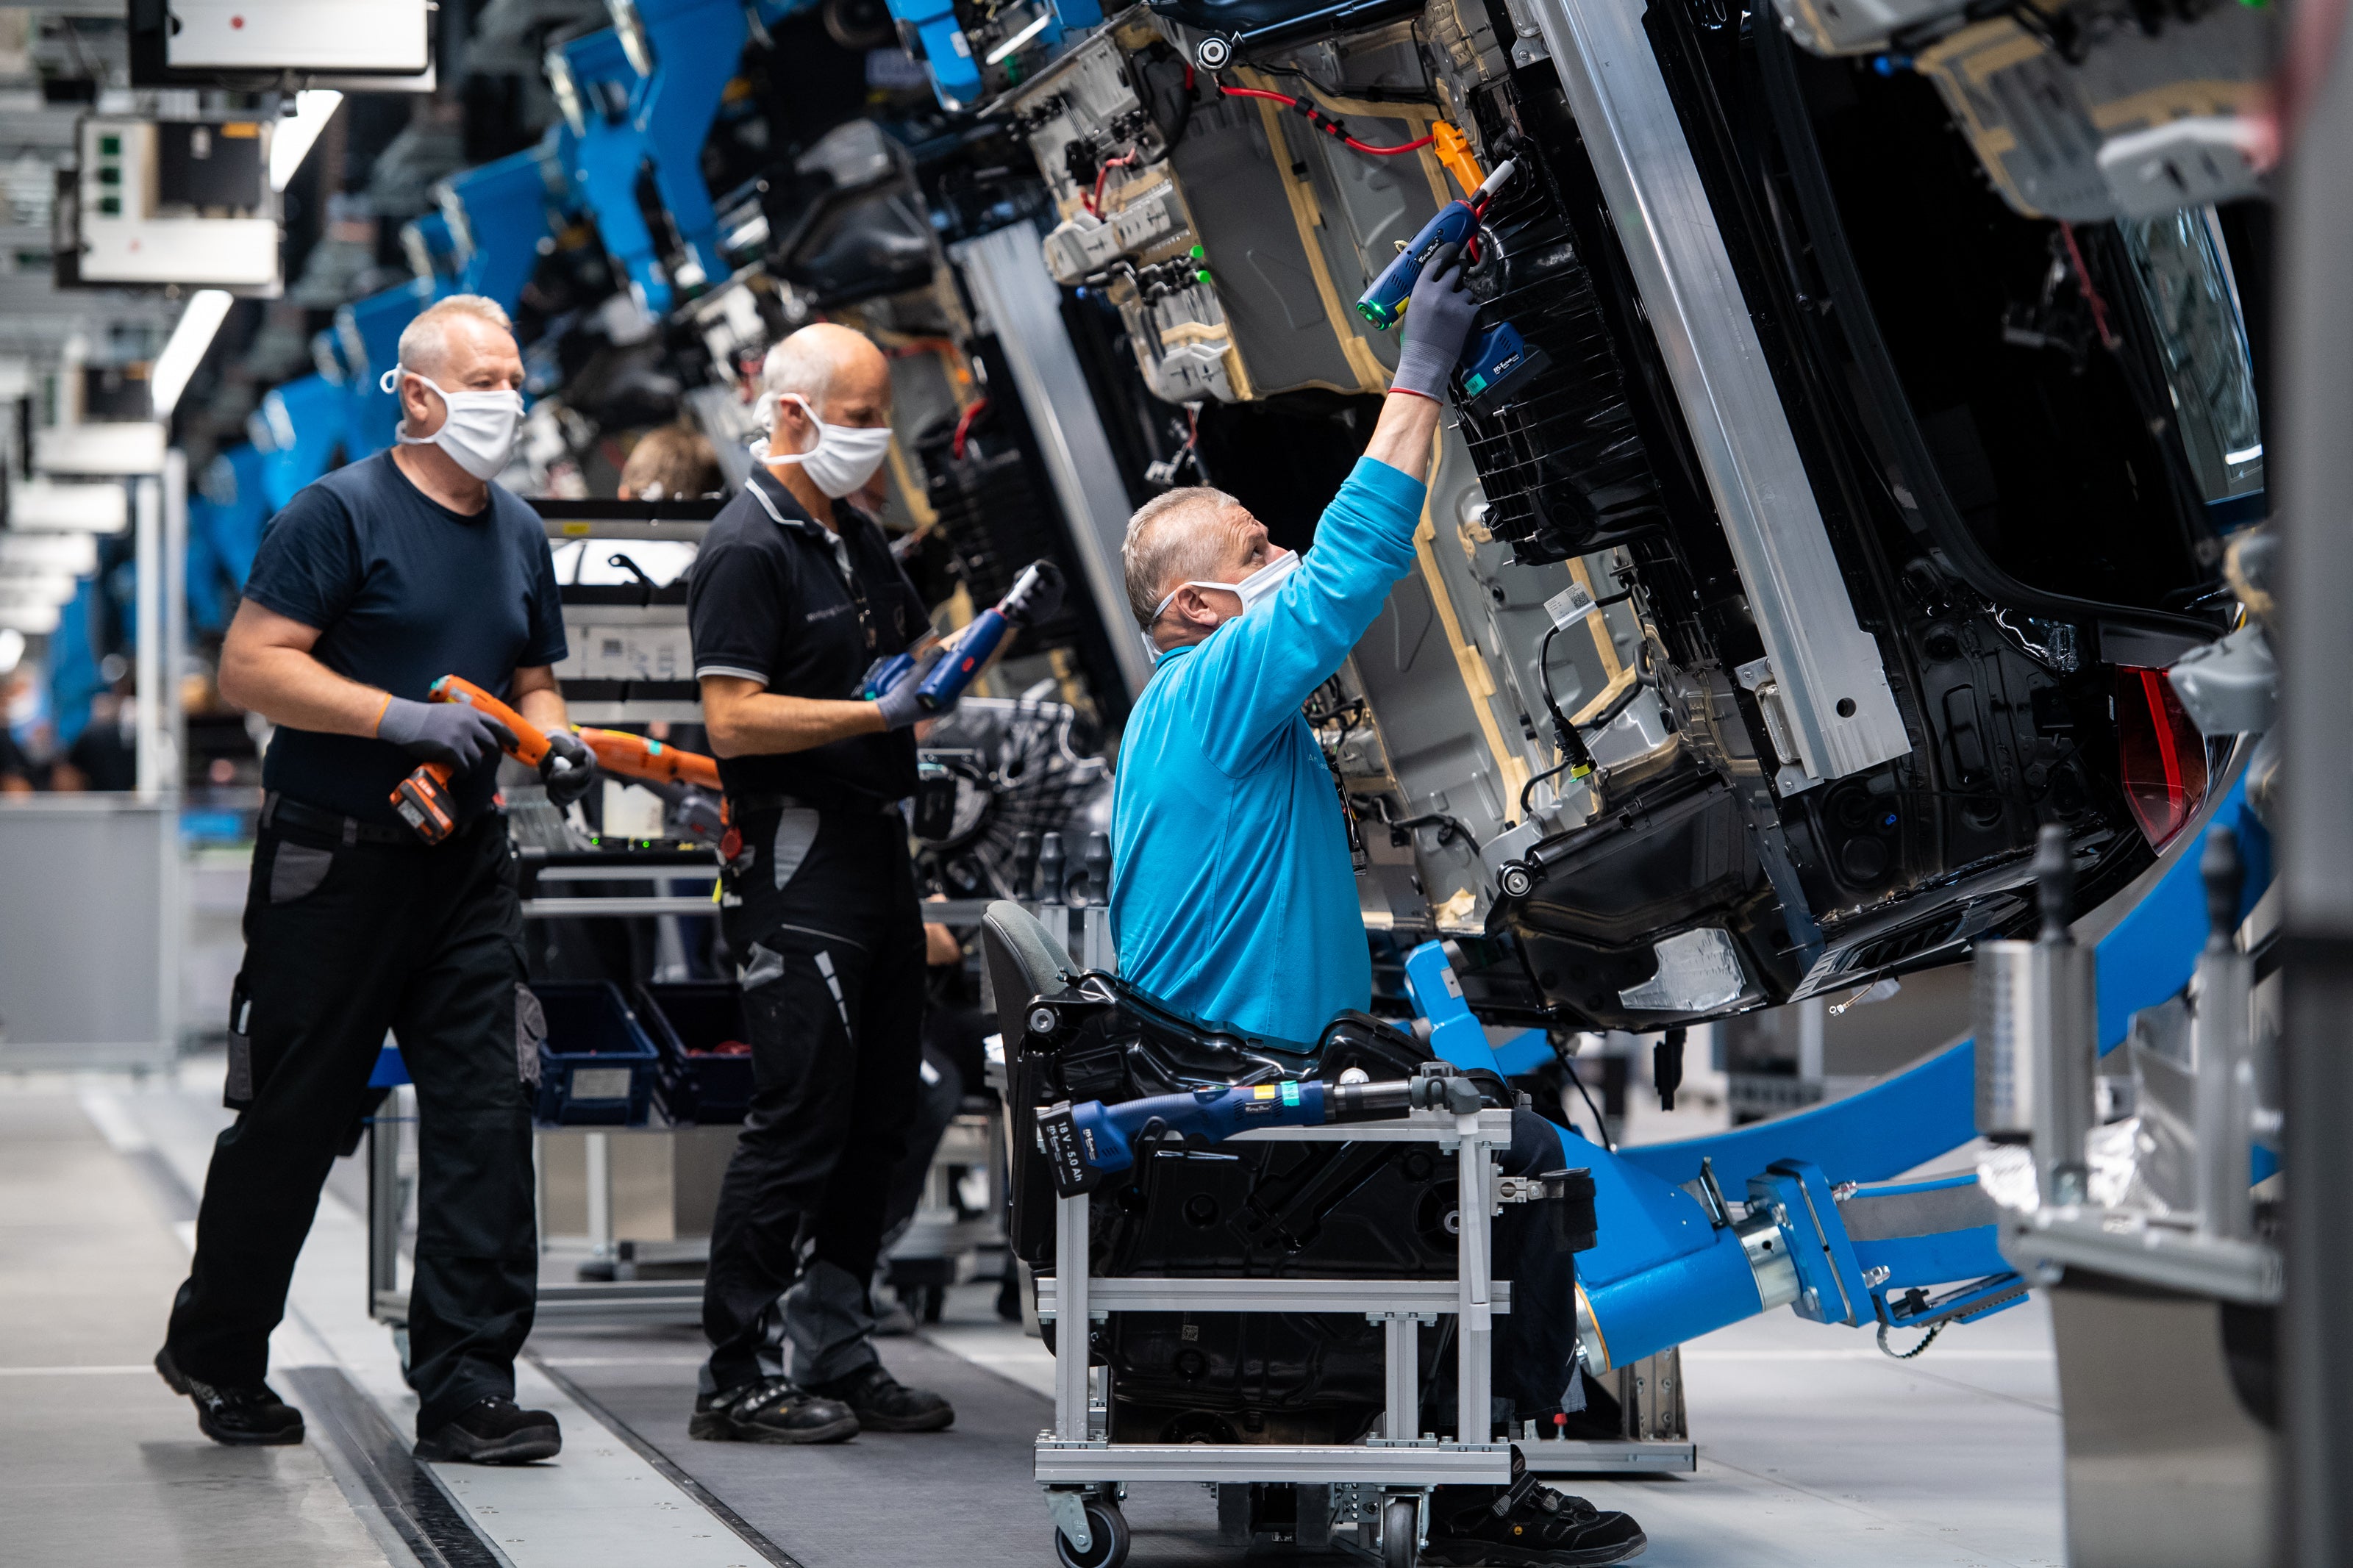 Workers at a Mercedes car manufacturing plant in Sindelfingen, Germany